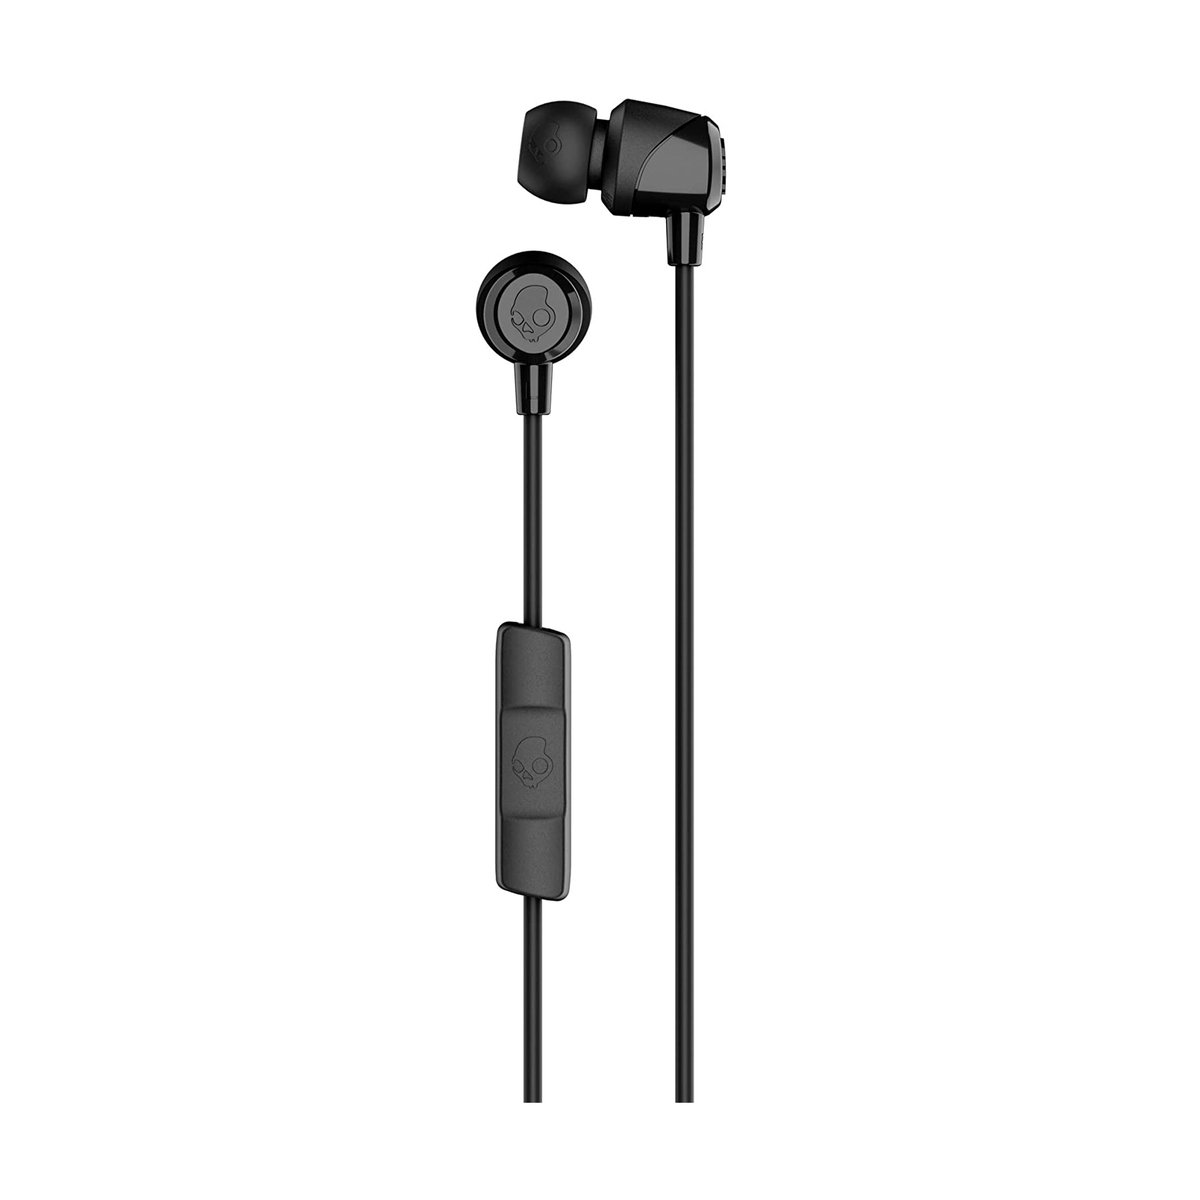 Skullcandy S2DUYK-343 Jib In-Ear Noise-Isolating Earbuds with Microphone and Remote for Hands-Free Calls - Black